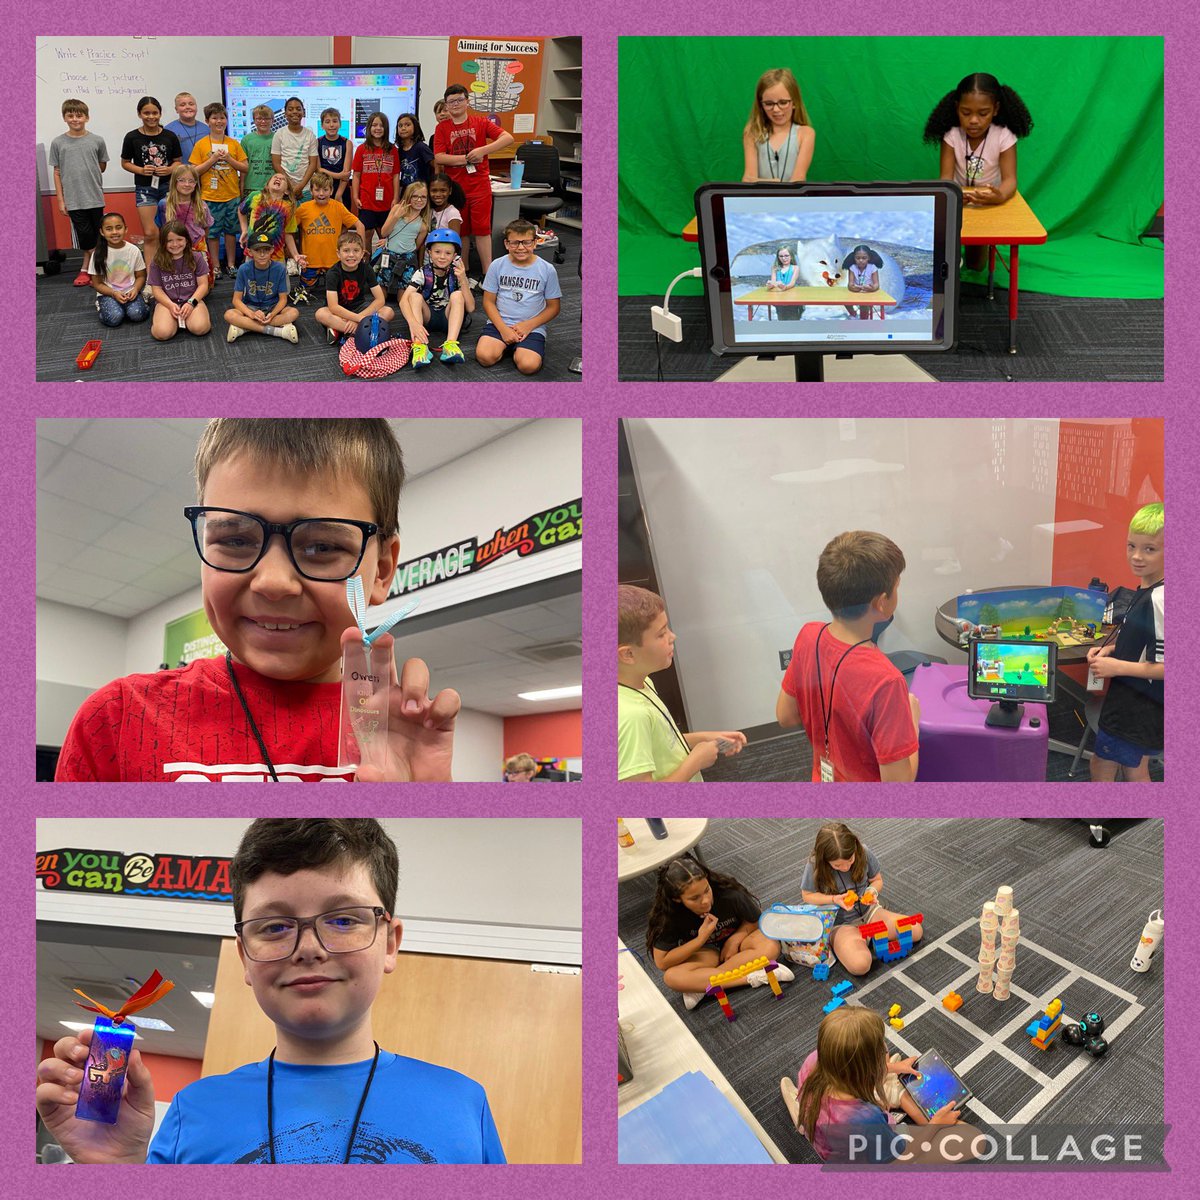 Session 2 of Tech Camp was this week! Ss completed different projects using coding, graphic design with the laser cutter, stop motion animation, research, and video production with the green screen. Both sessions worked hard and let their creativity take over! It was a BLAST!